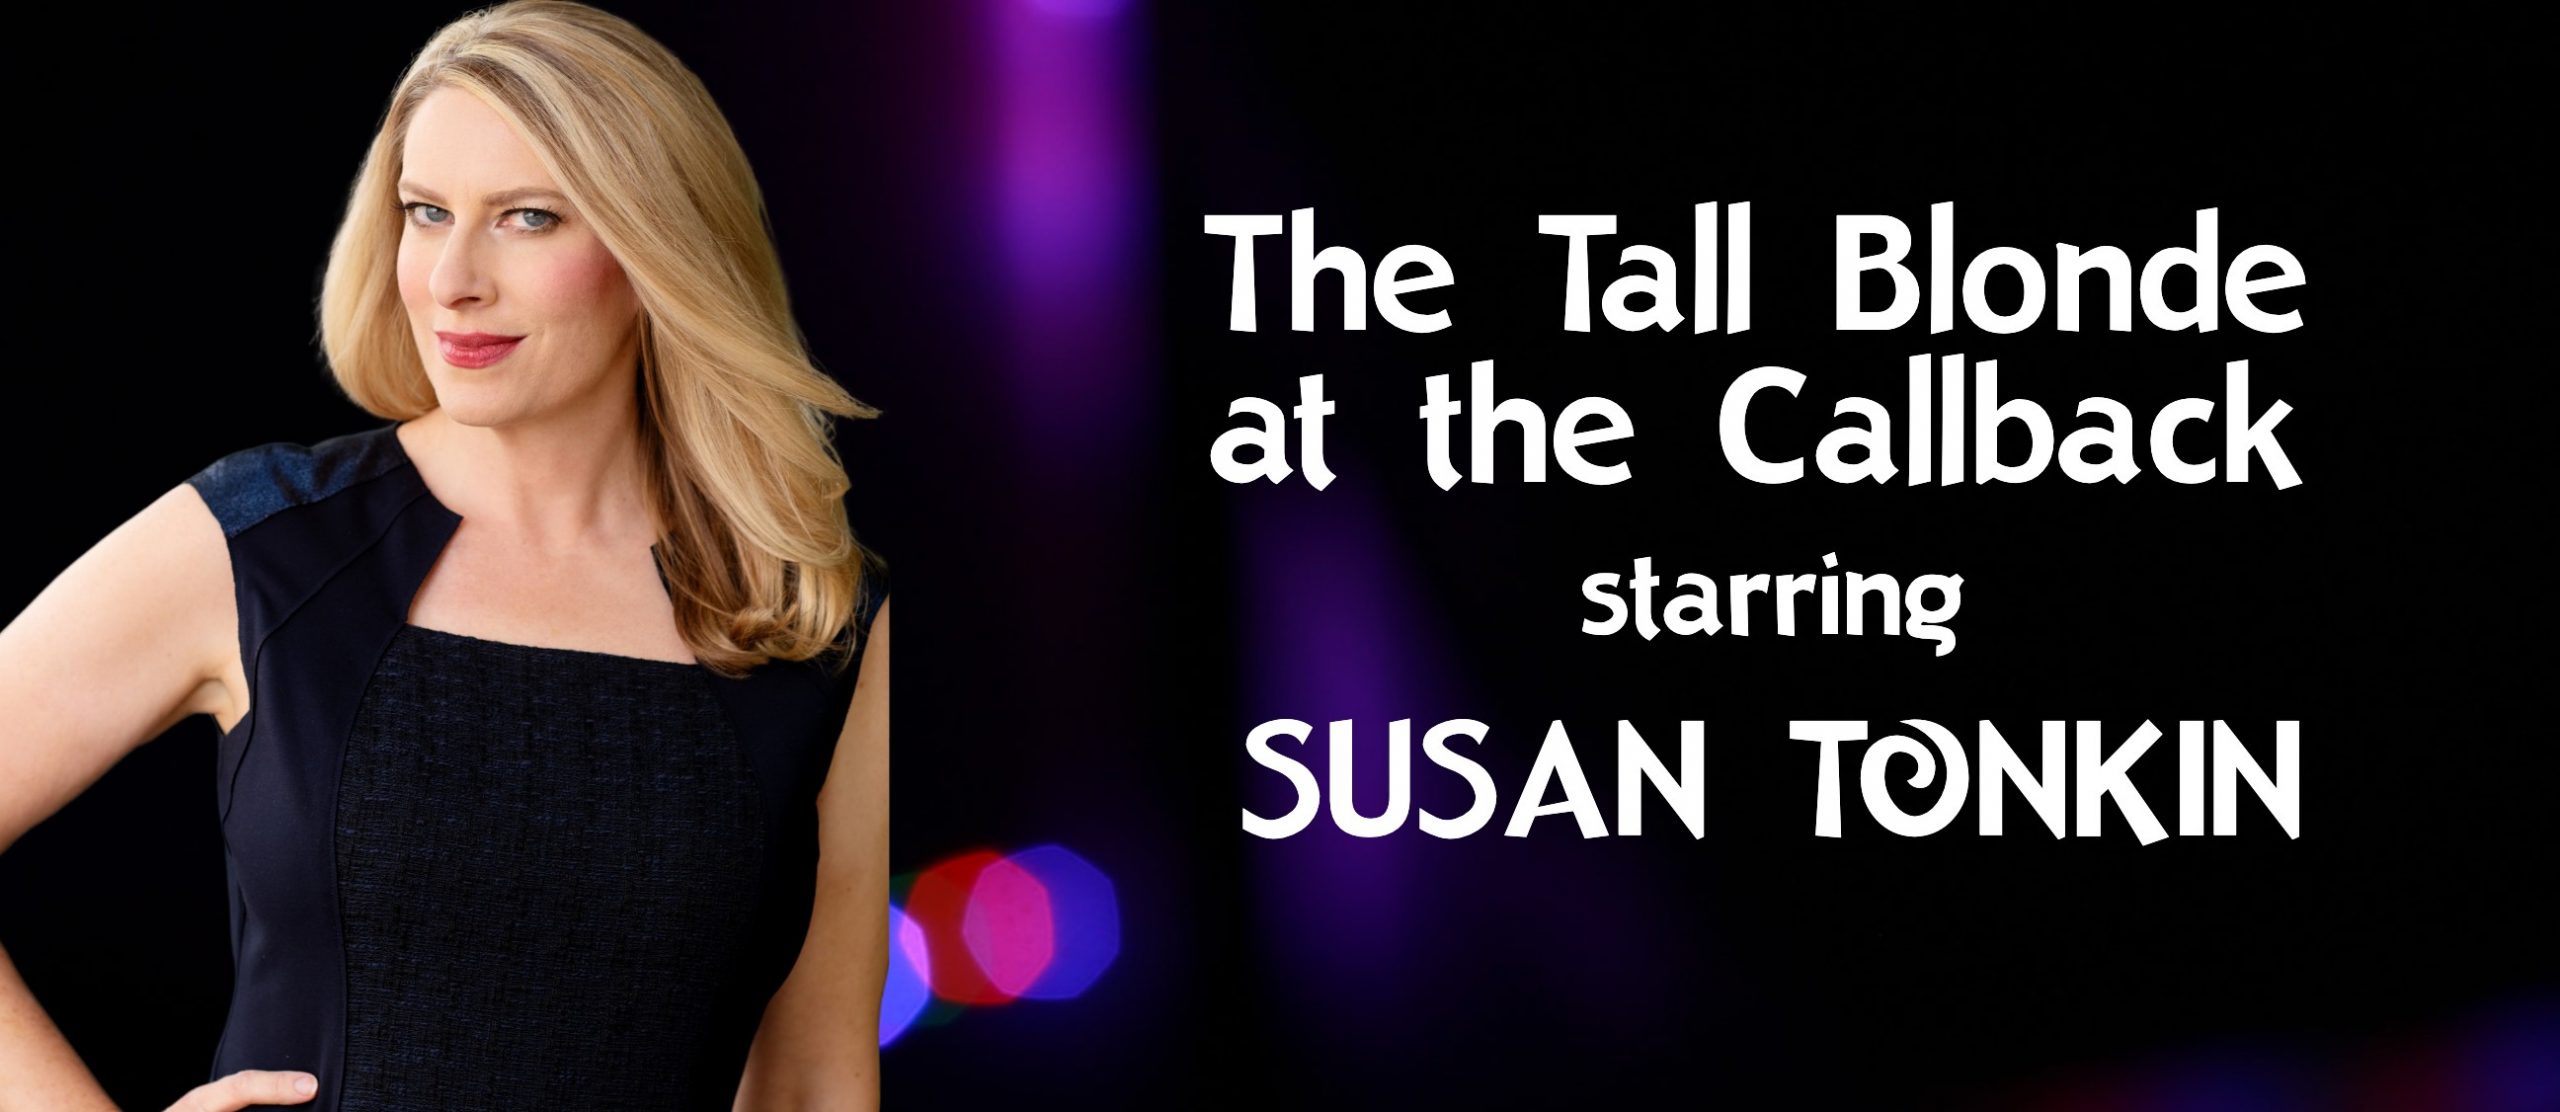 The Tall Blonde at the Callback Starring SUSAN TONKIN